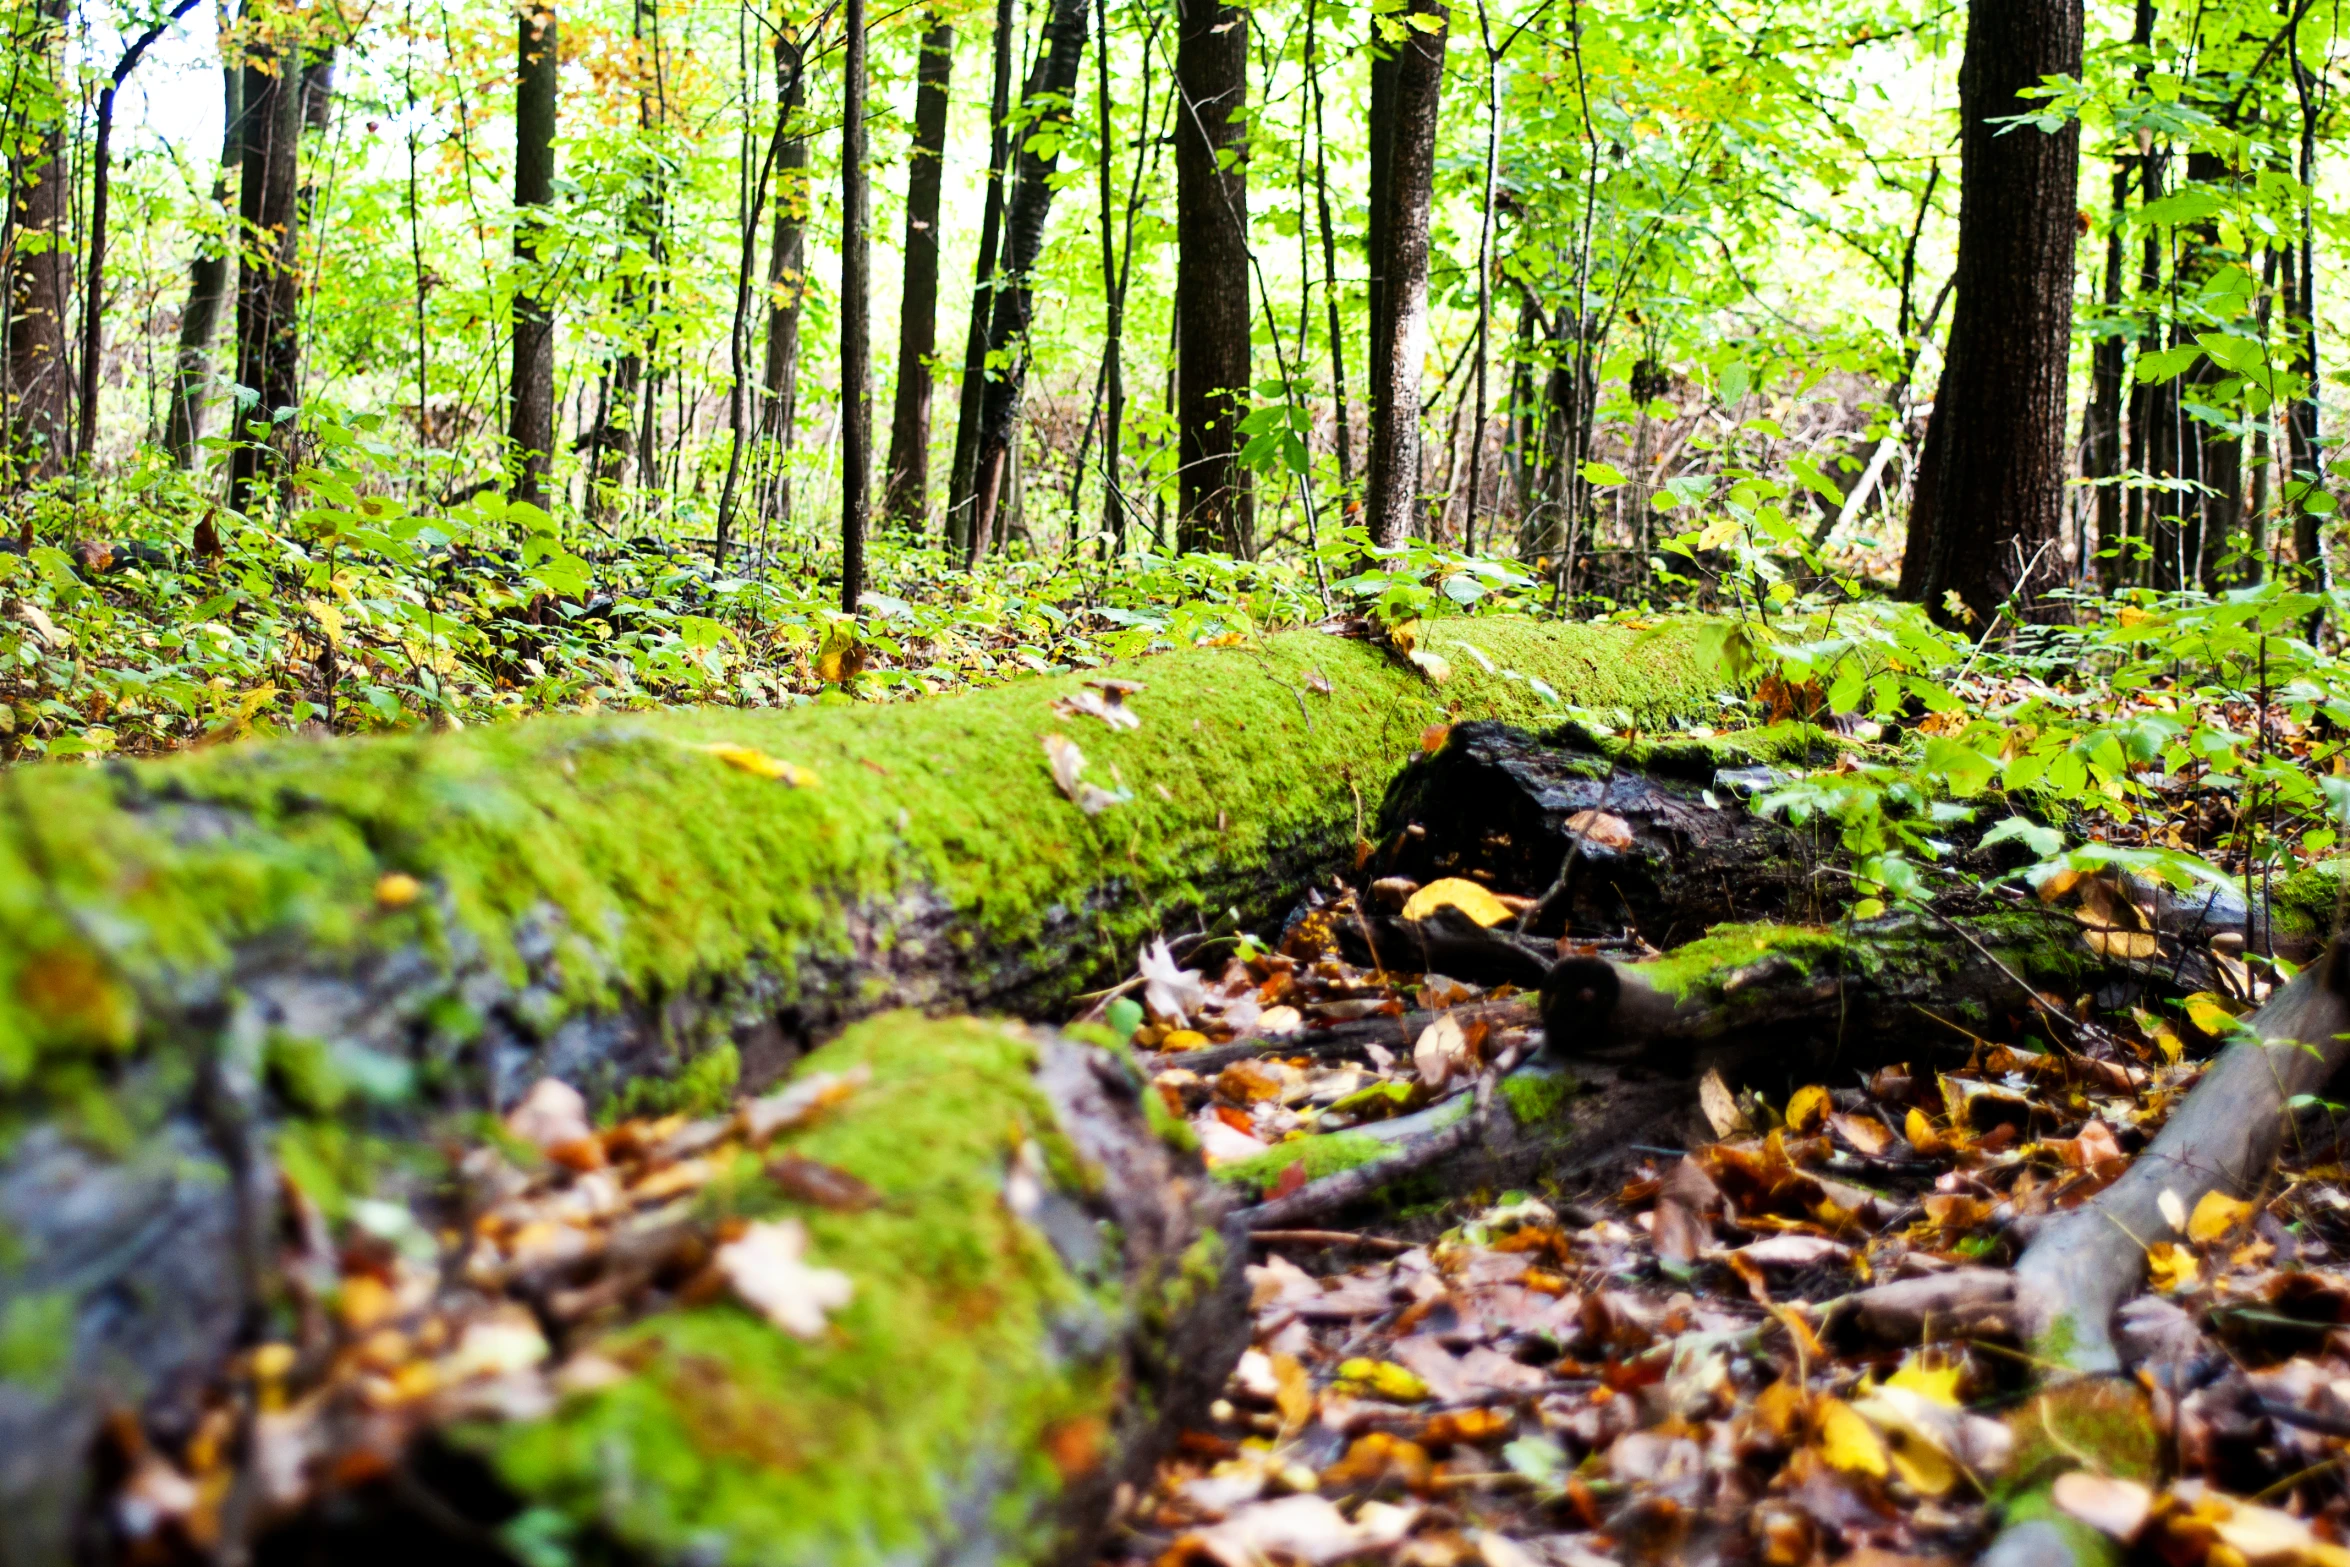 mossy logs sit among the wooded area